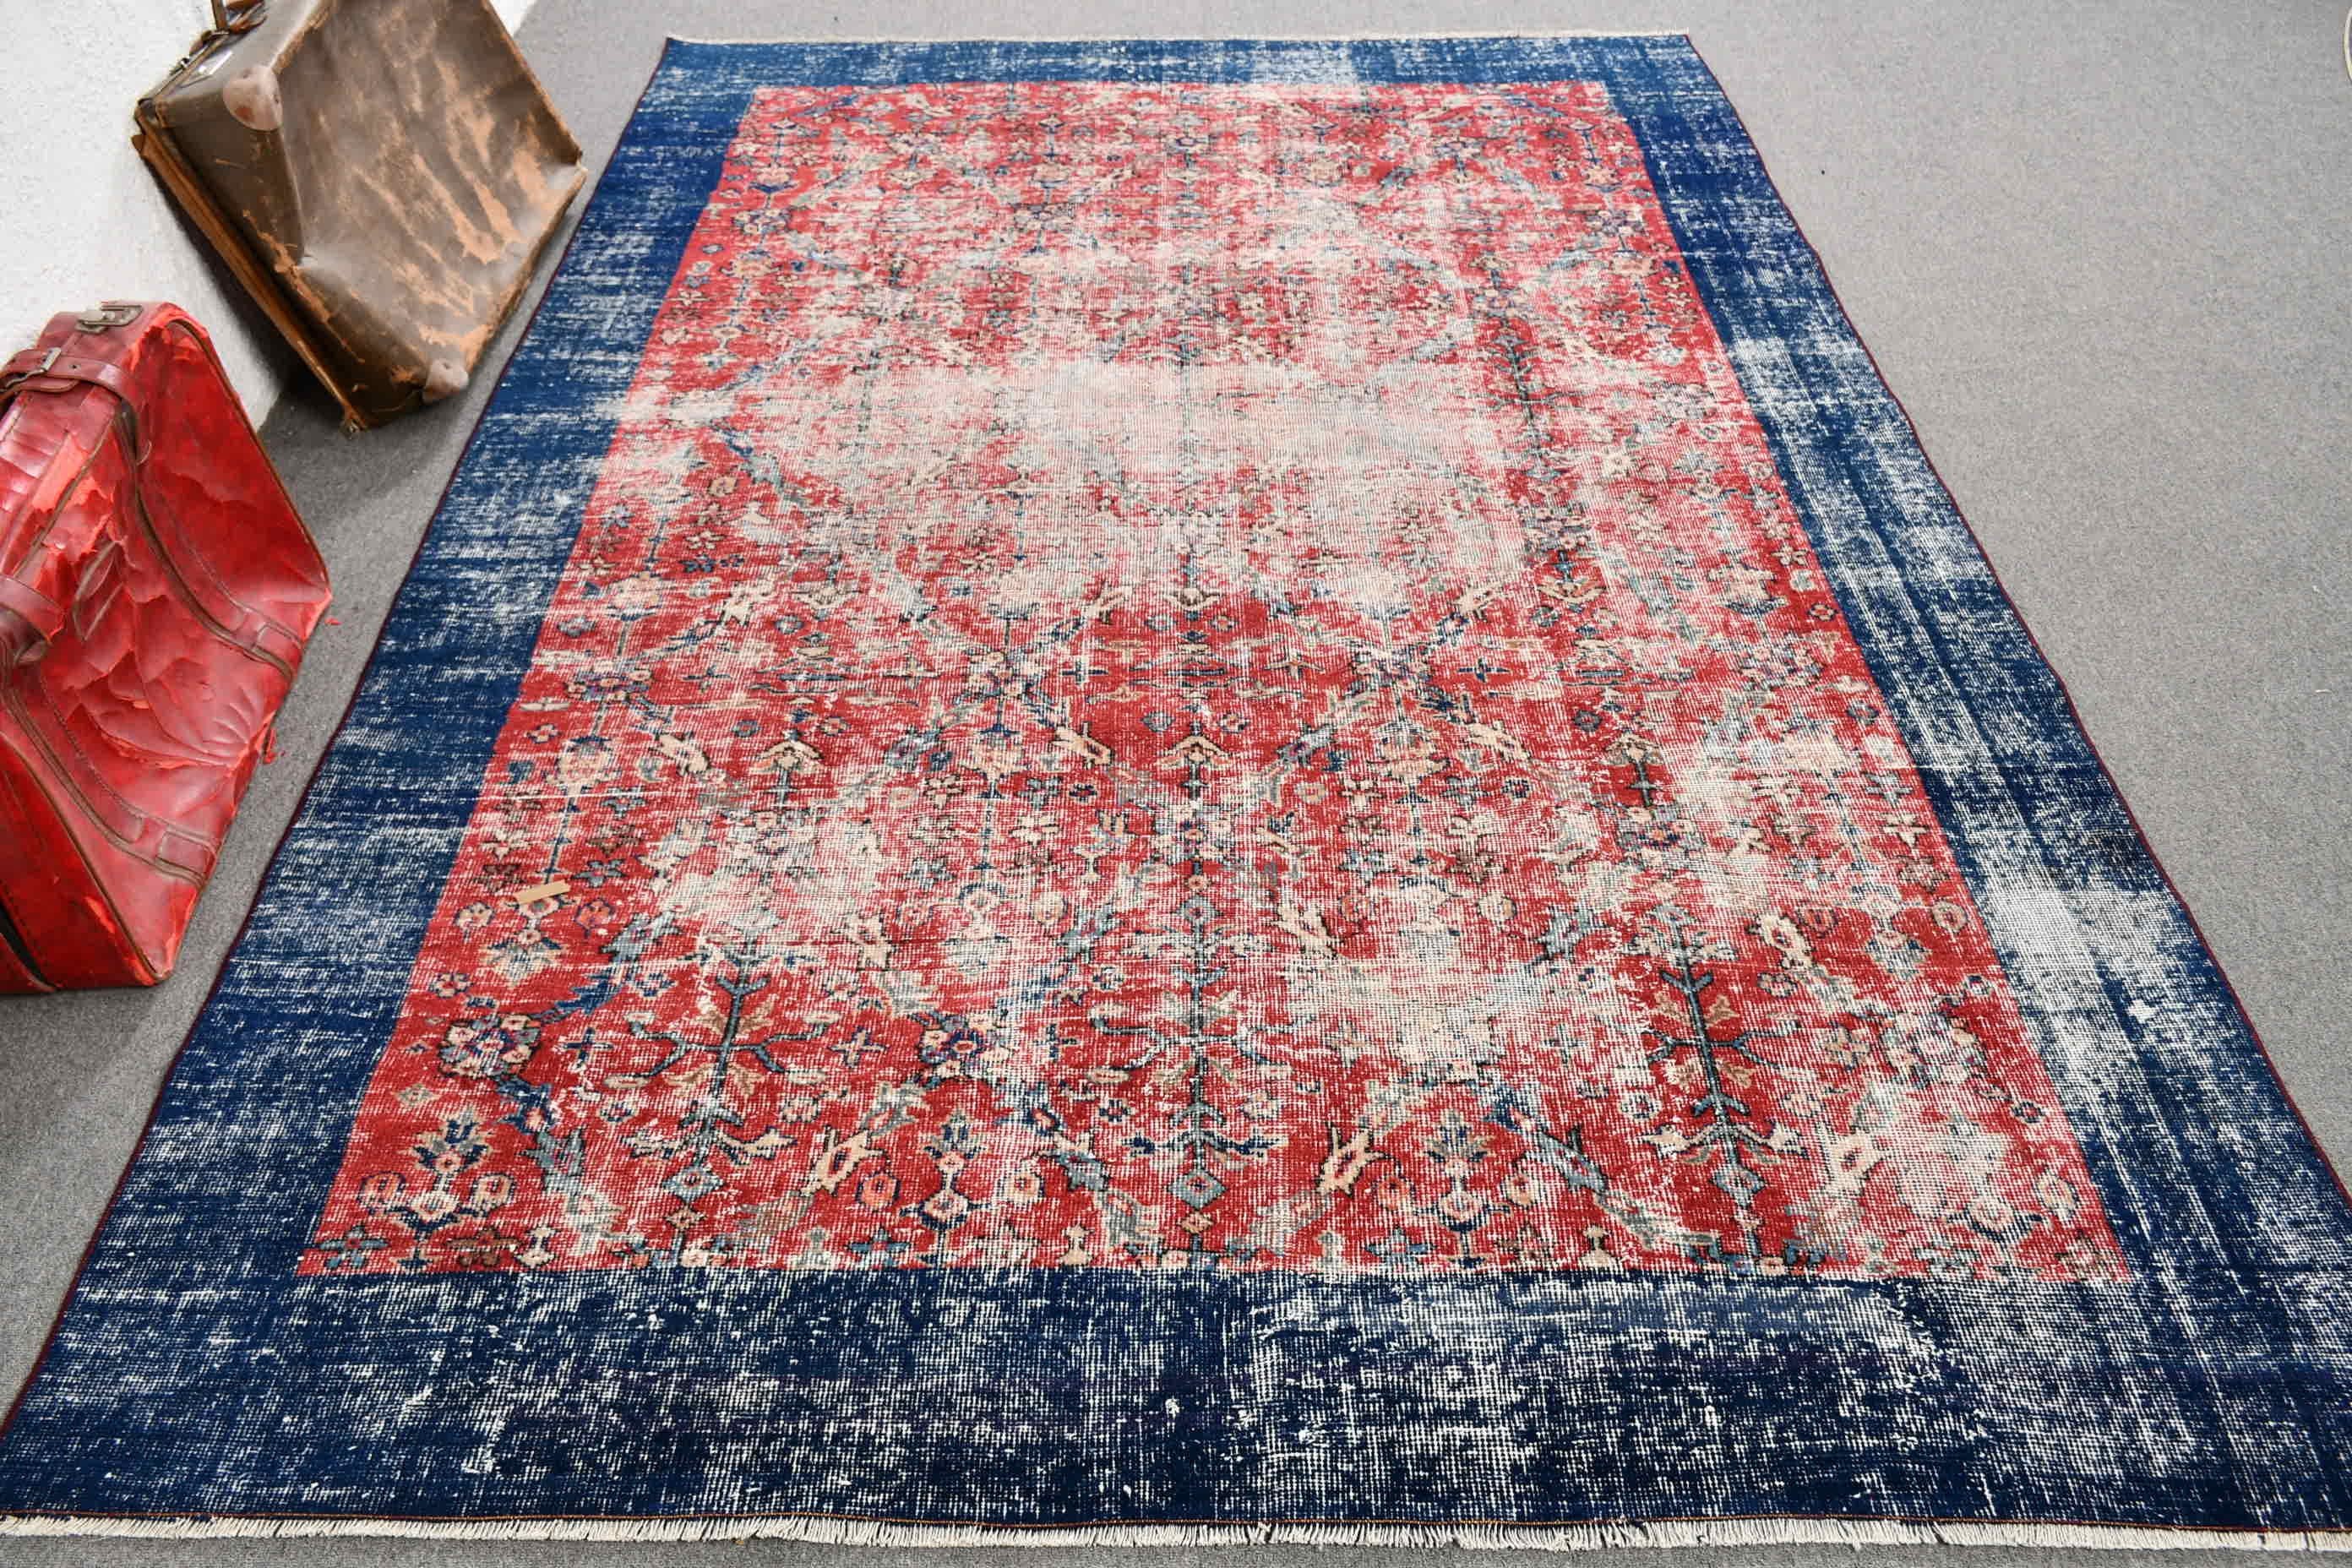 Eclectic Rugs, Turkish Rug, Dining Room Rugs, Red Moroccan Rug, 6.3x9.1 ft Large Rug, Kitchen Rug, Vintage Rugs, Cool Rugs, Bedroom Rugs